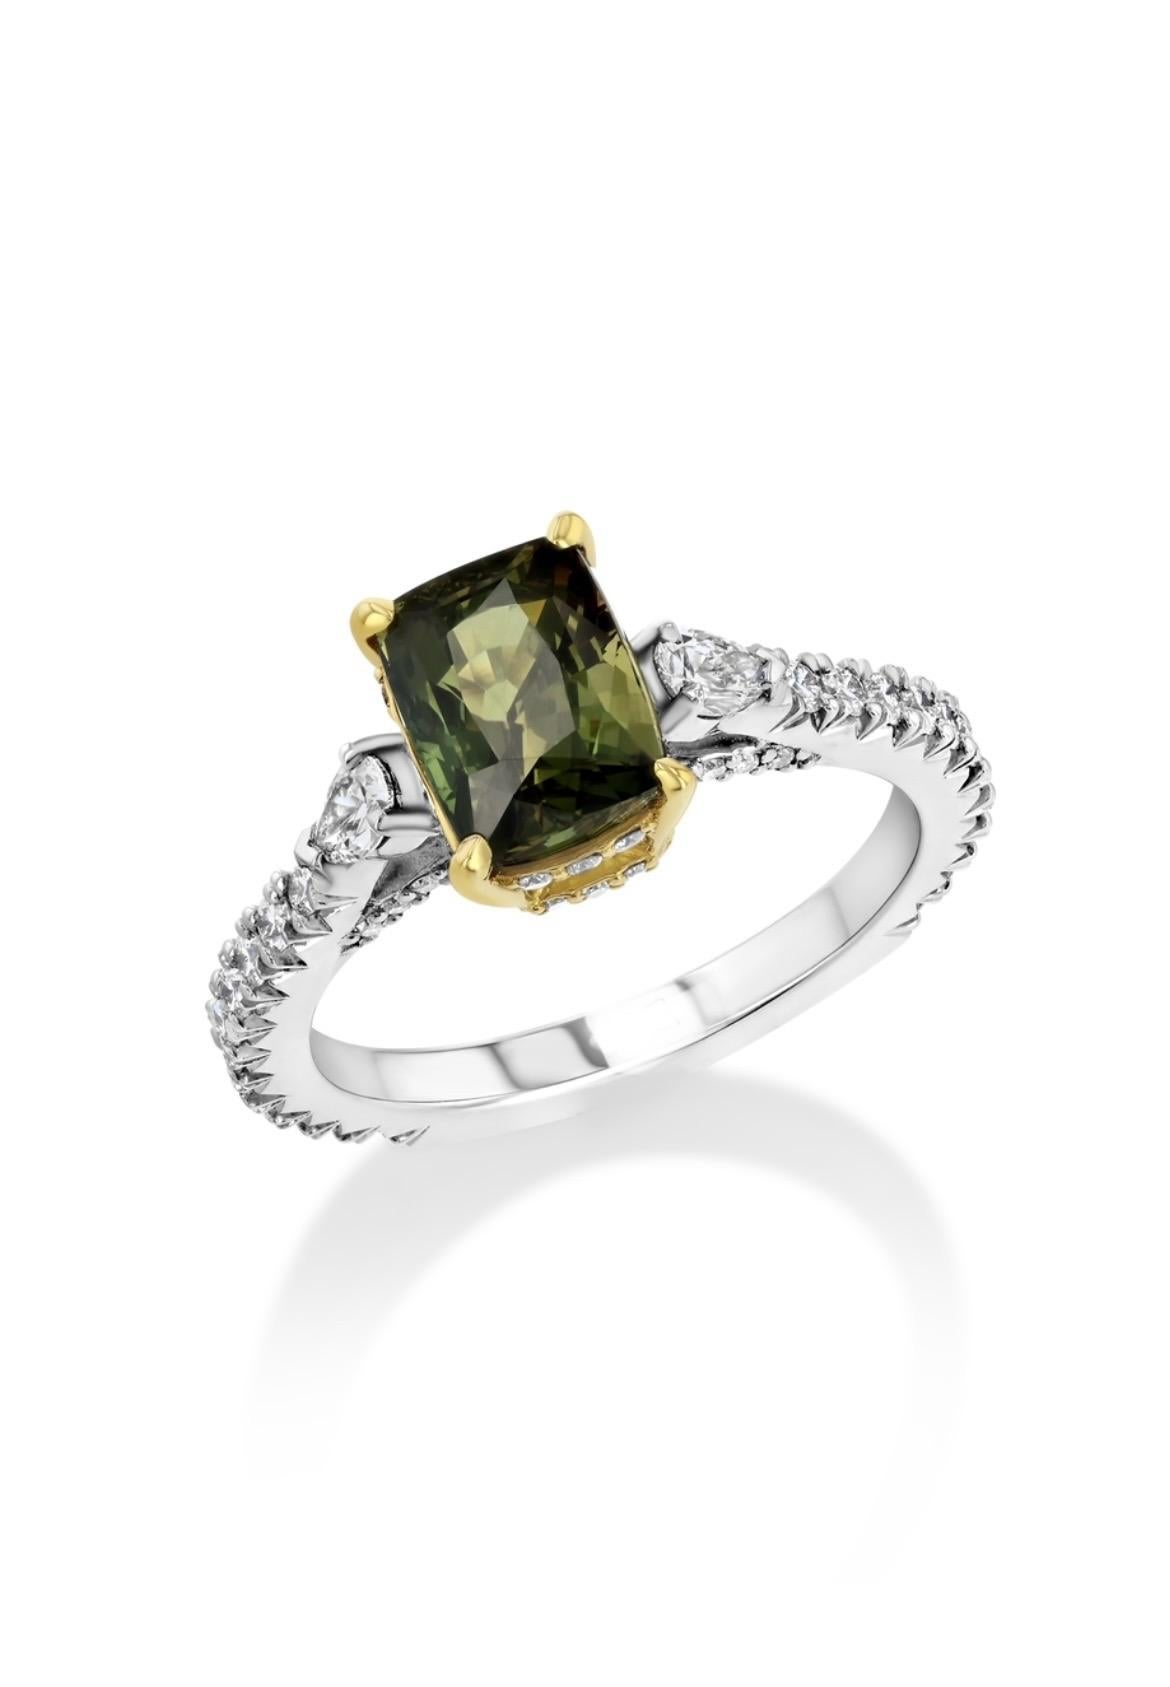 2.50ct cushion-cut Alexandrite from Sri Lanka is nestled in 18K yellow gold with platinum. The spellbinding Alexandrite is flanked by two pear-cut and numerous round diamonds totaling 0.62 carats. 

This Alexandrite changes from yellow-green to